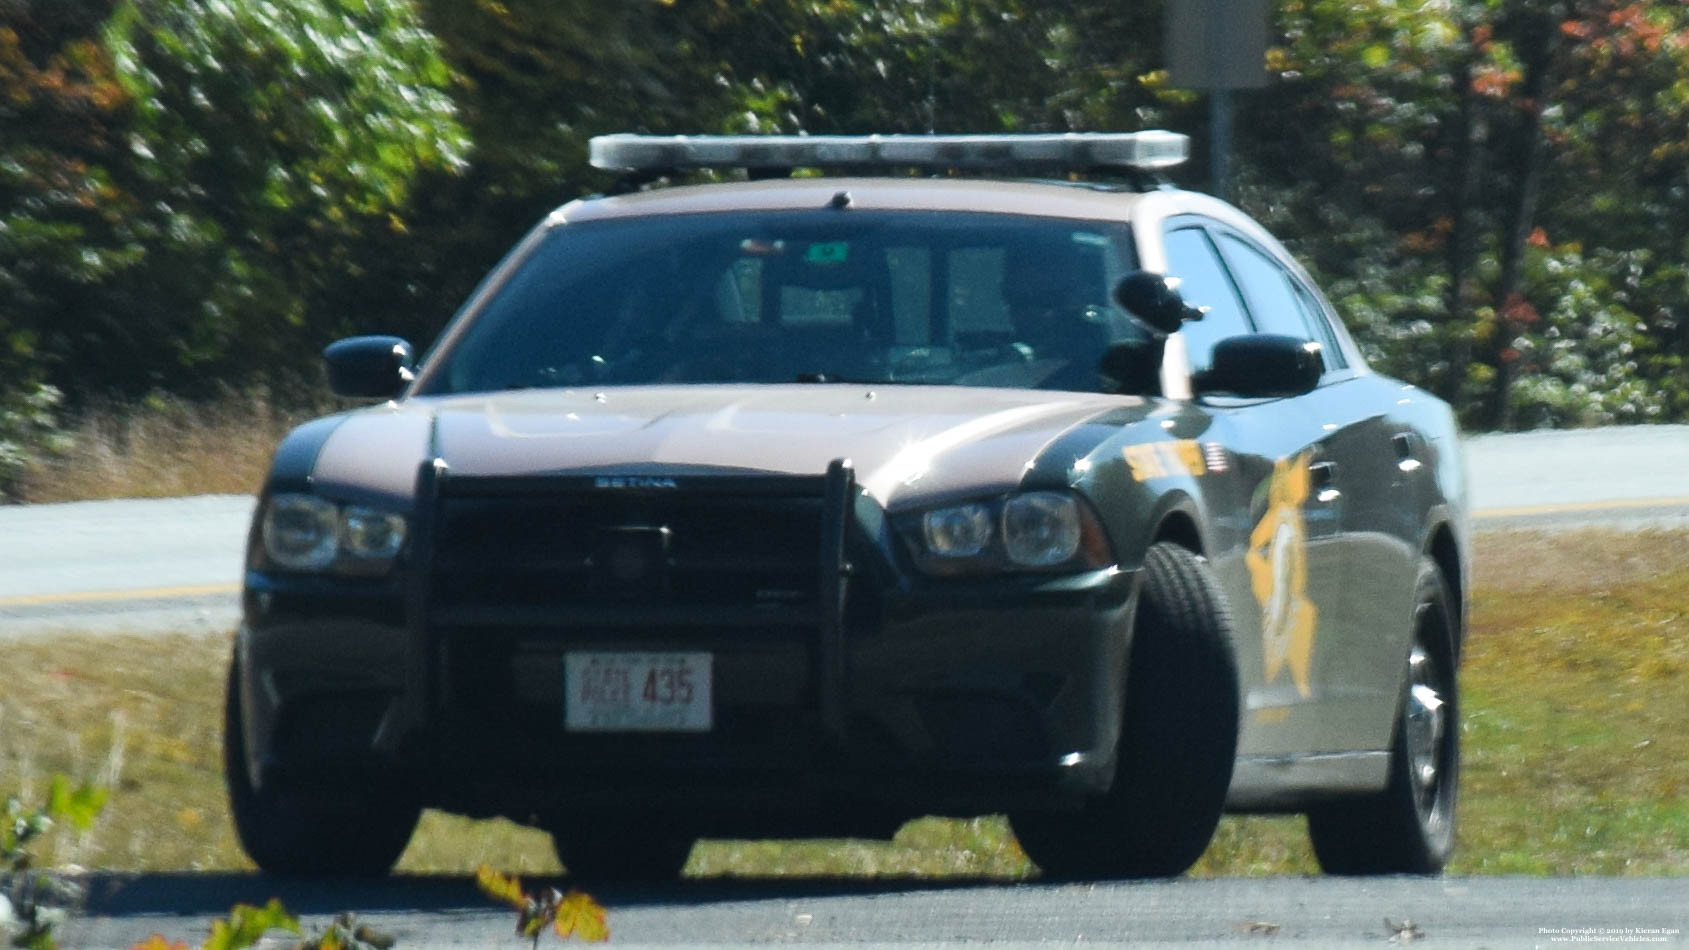 A photo  of New Hampshire State Police
            Cruiser 435, a 2011-2014 Dodge Charger             taken by Kieran Egan